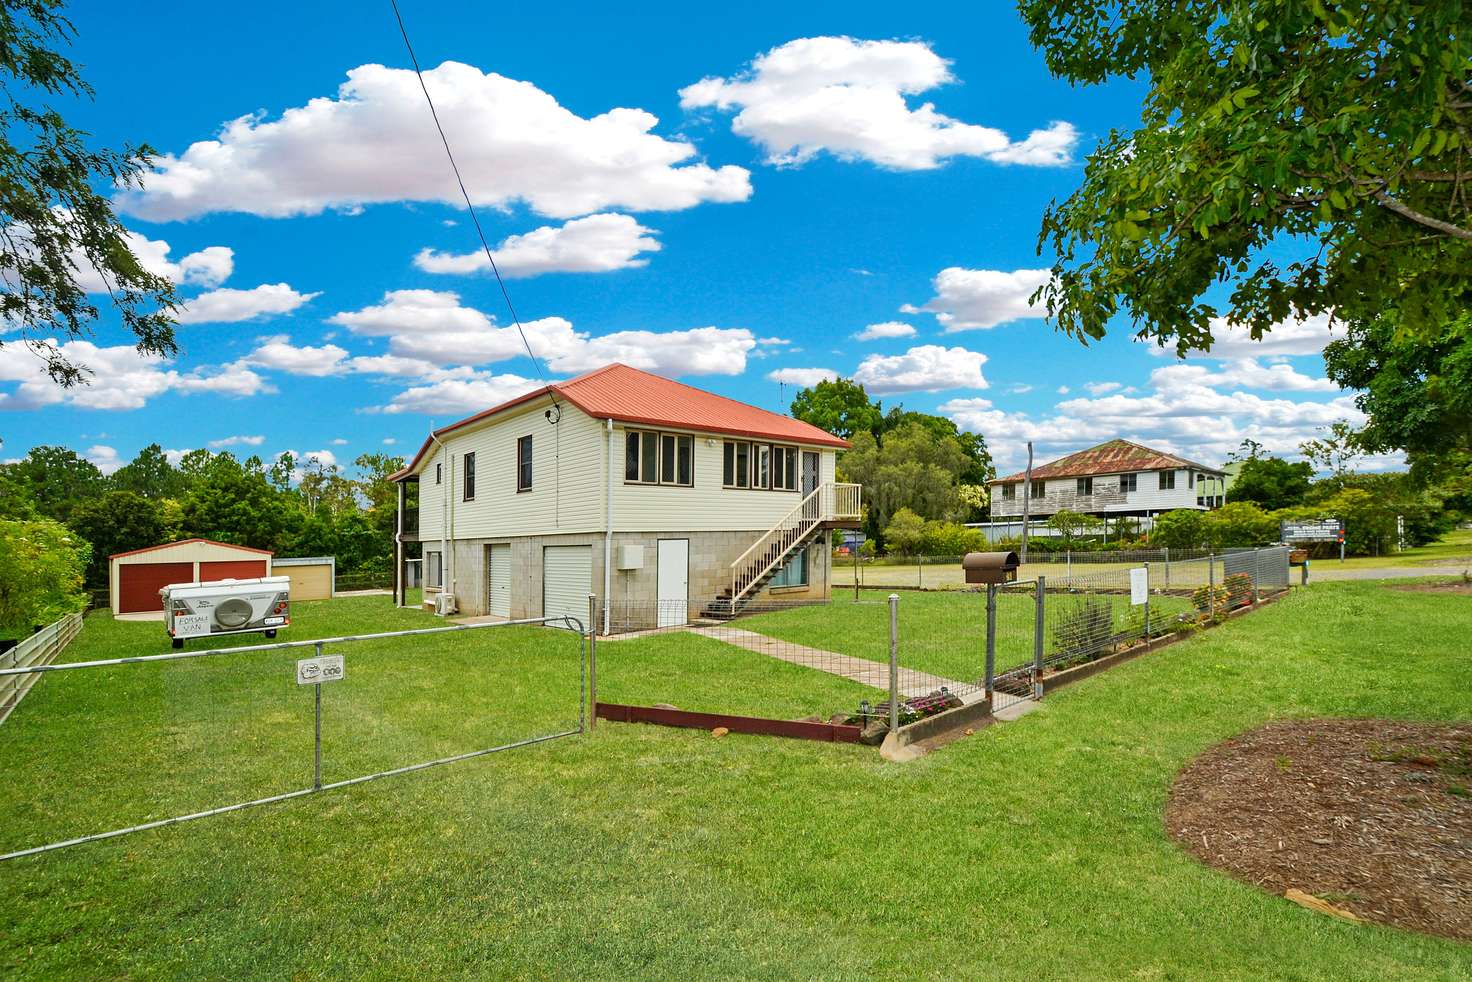 Main view of Homely house listing, 26 Caloundra Street, Landsborough QLD 4550